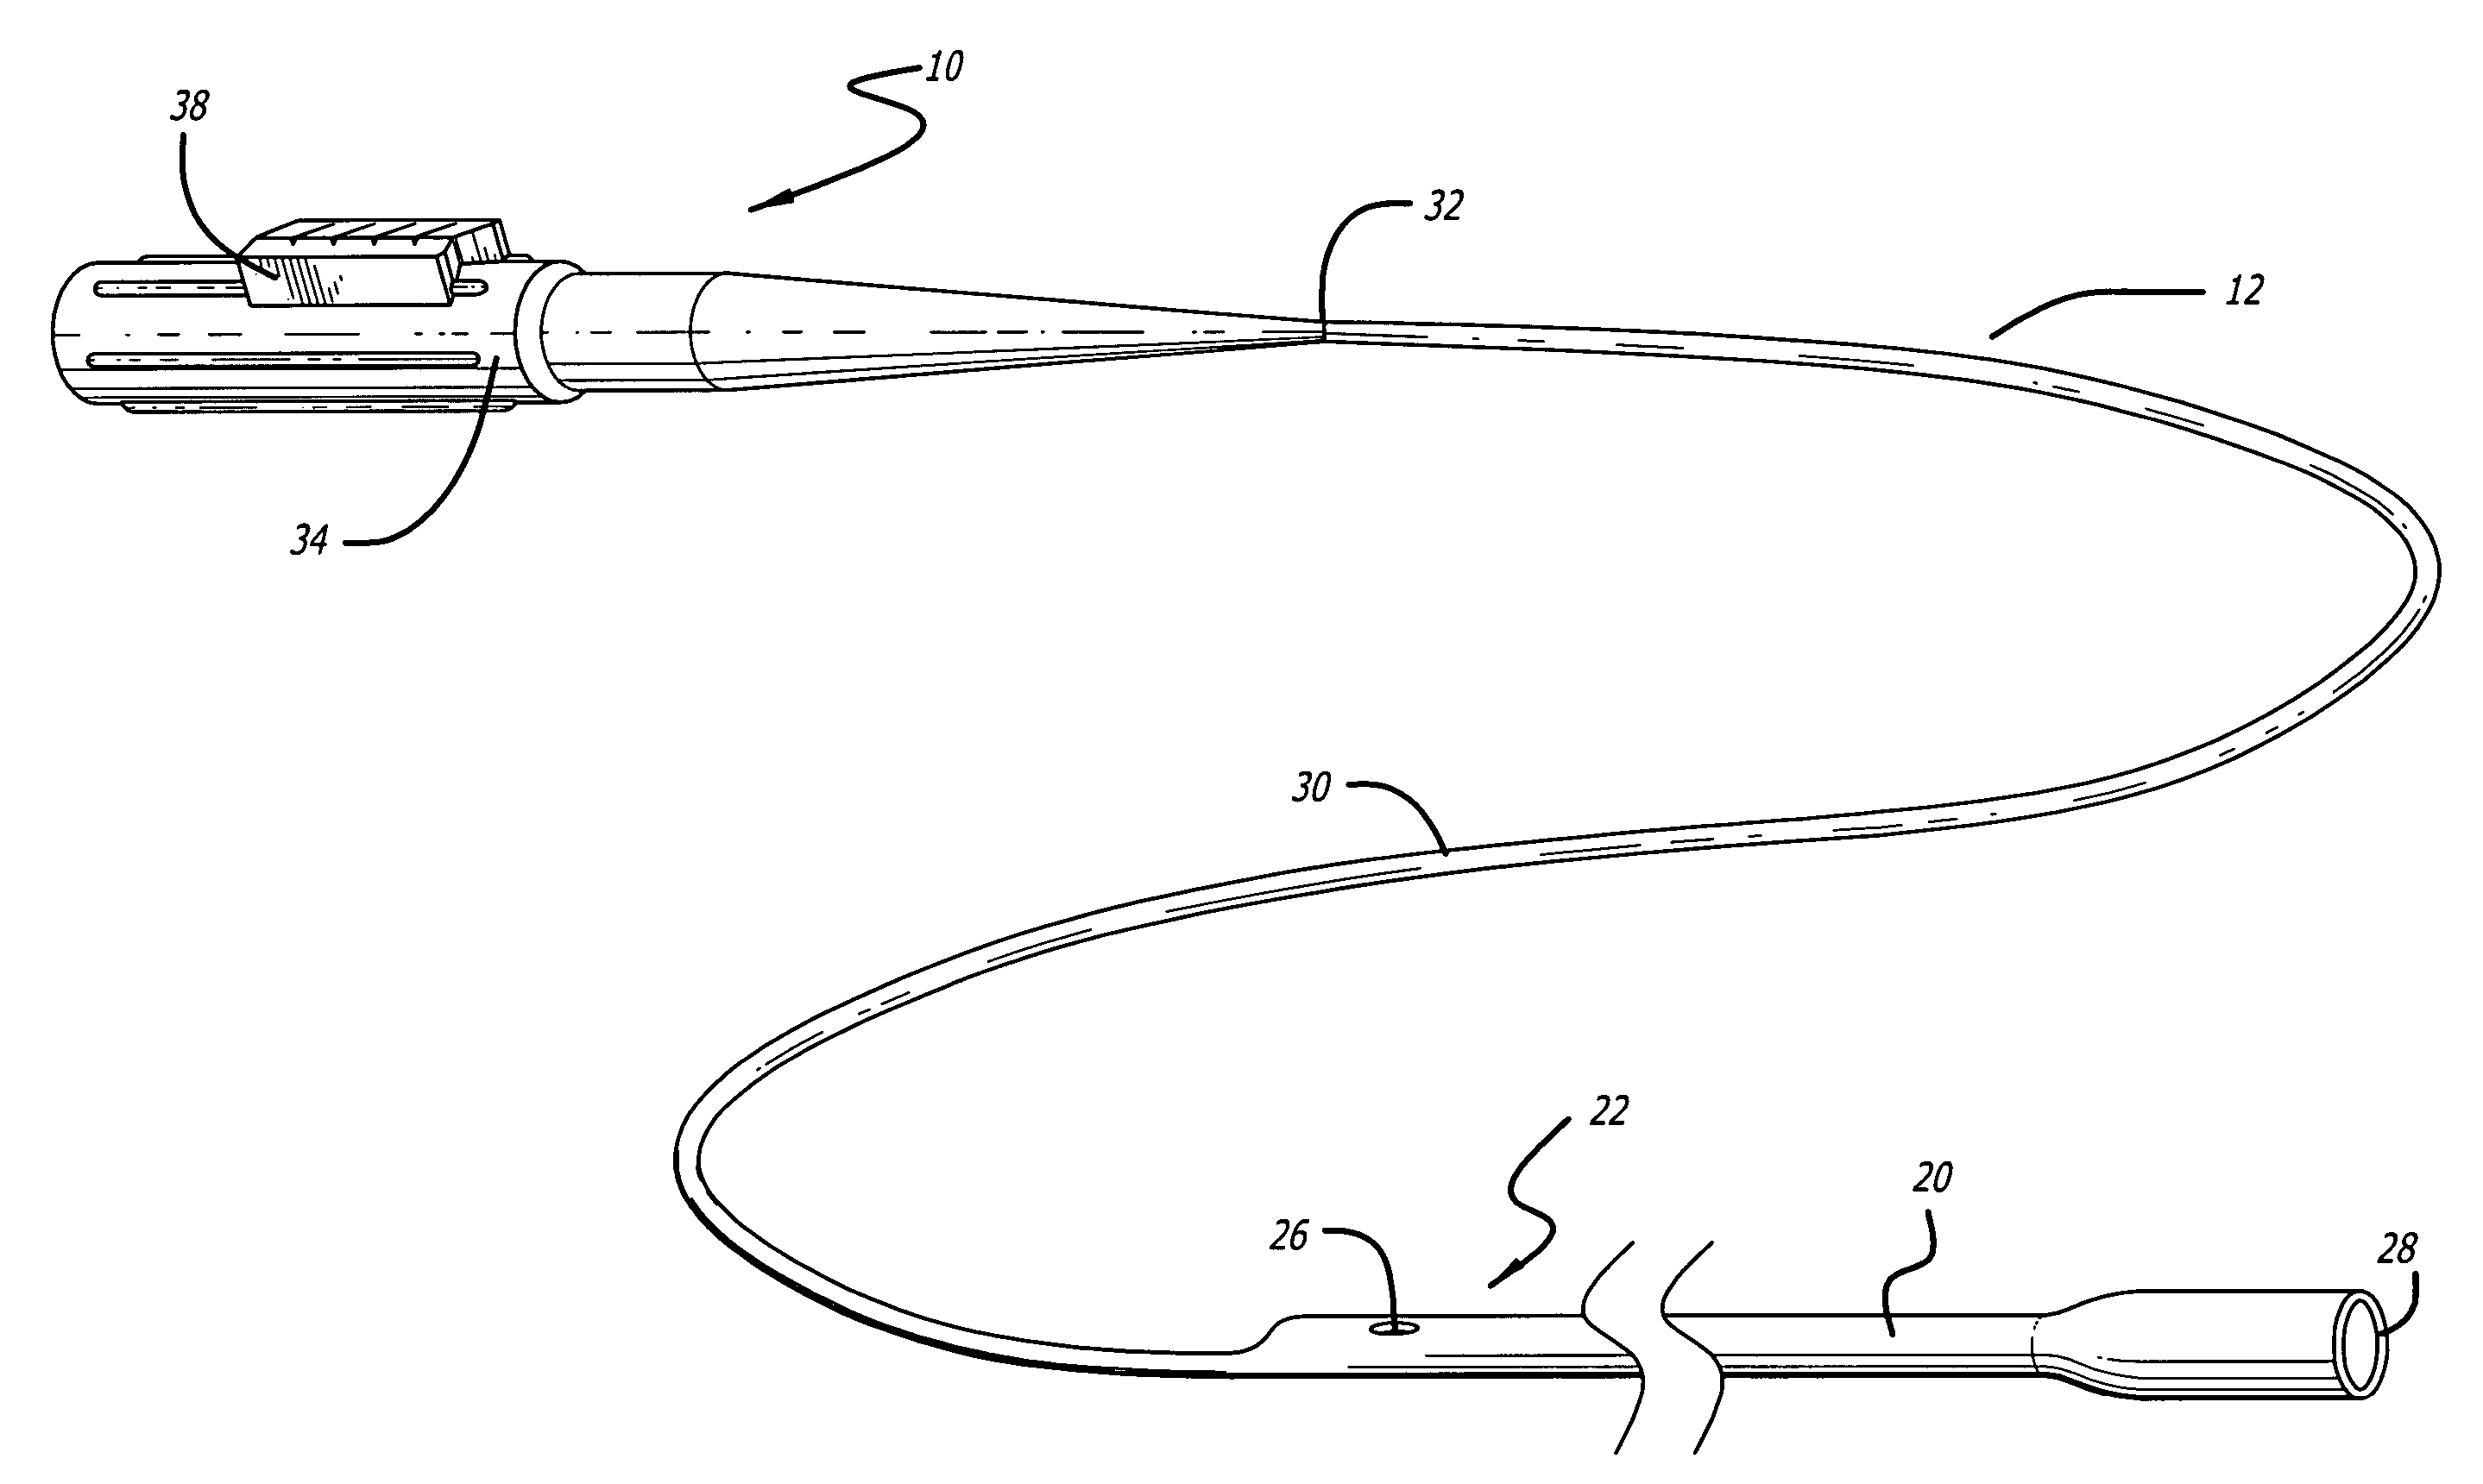 Guide wire locking mechanism for rapid exchange and other catheter systems